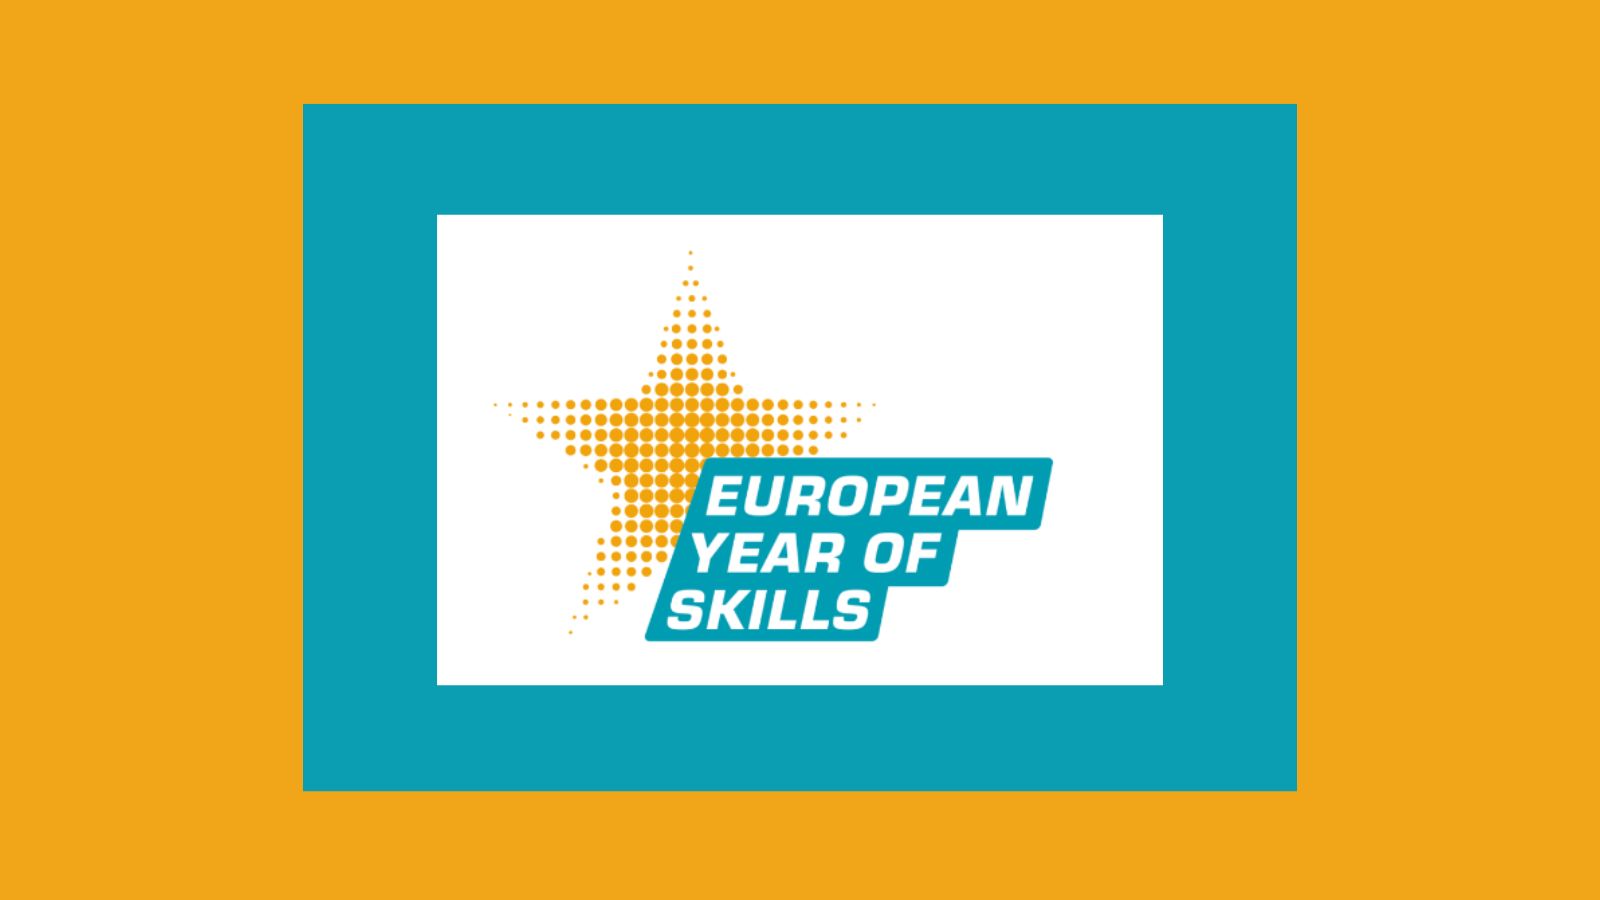 Today marks the kick off the European Year of Skills